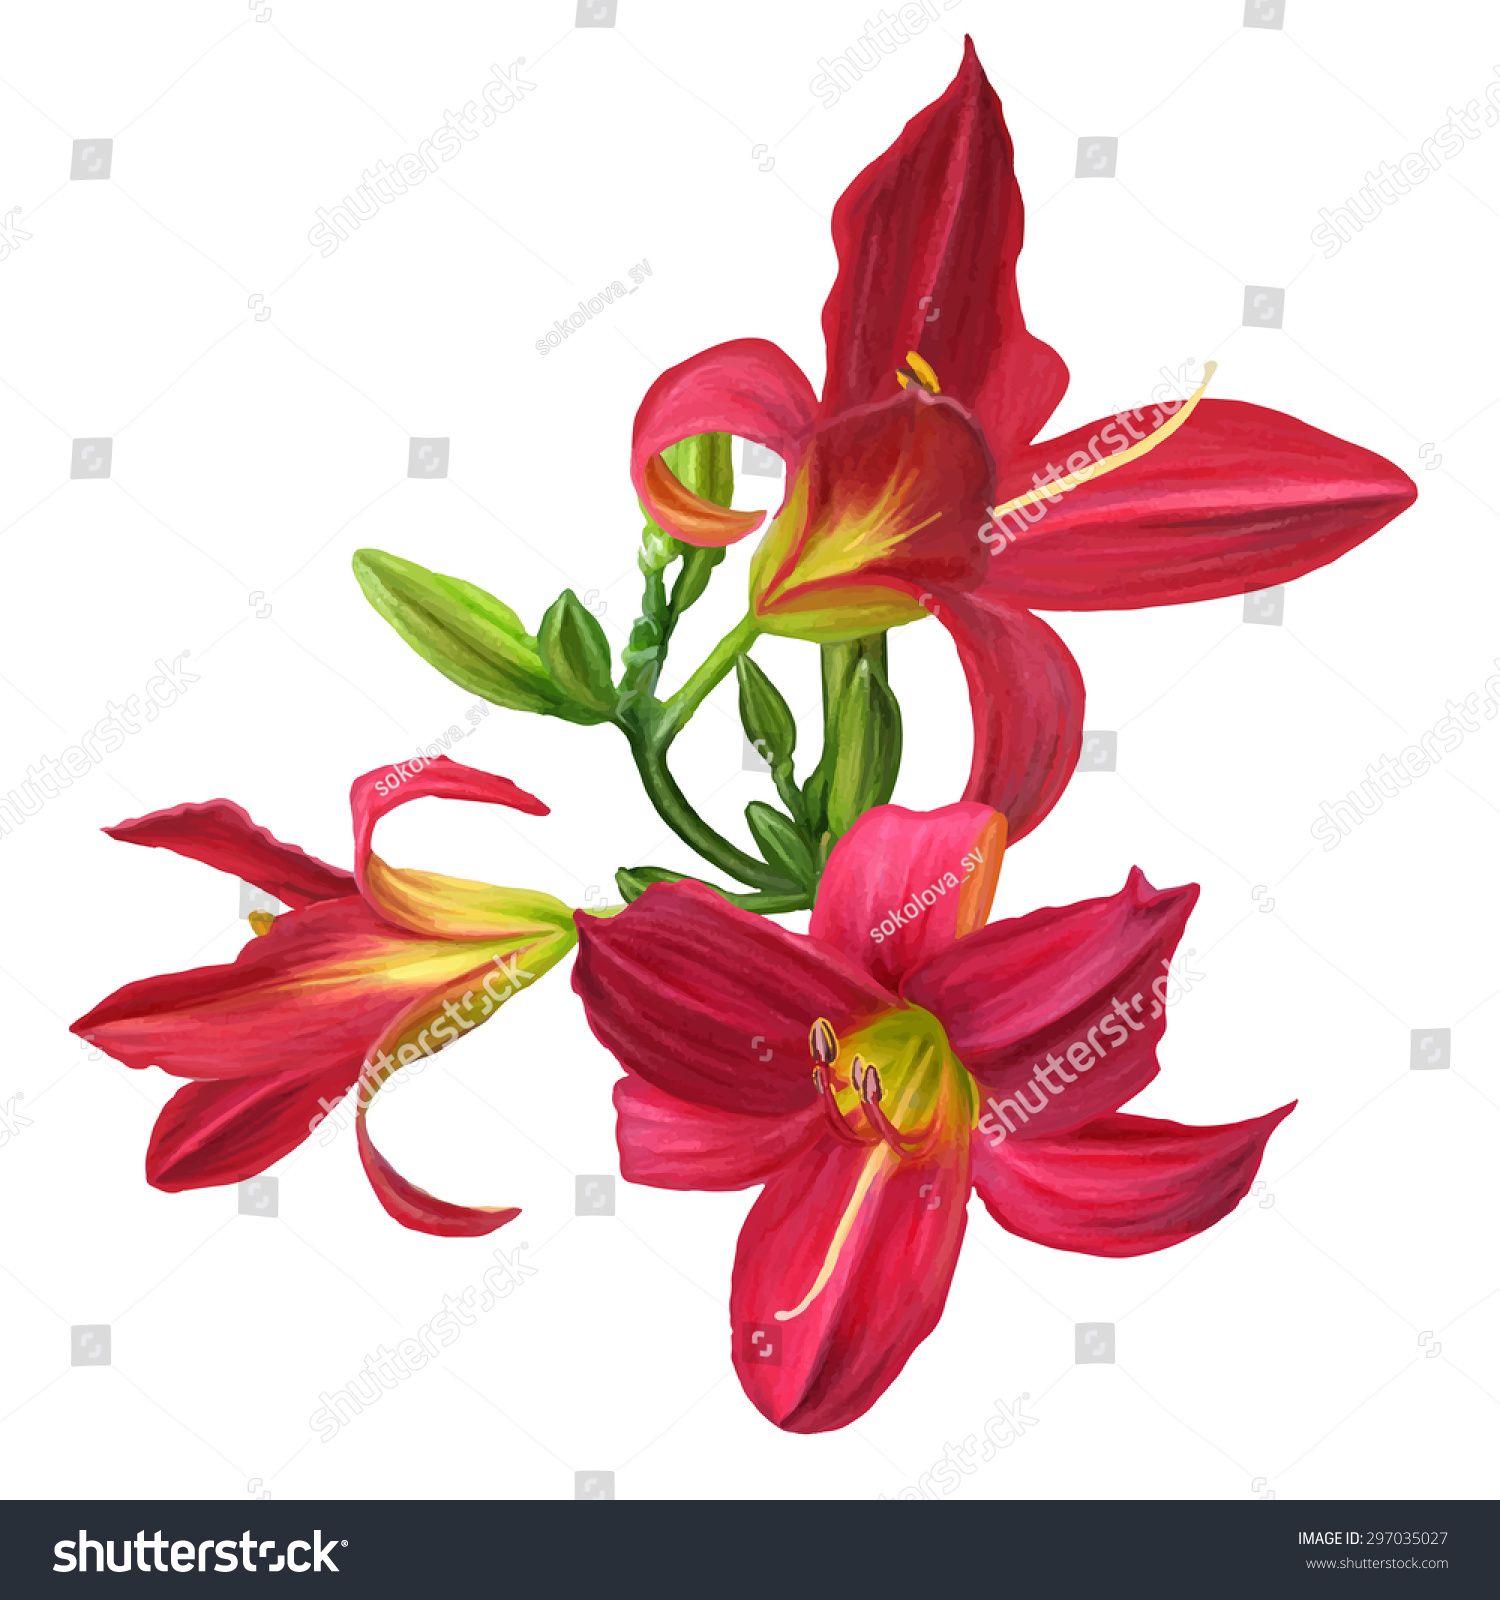 Red Lily Flower Isolated Stock Vector (Royalty Free) 297035027